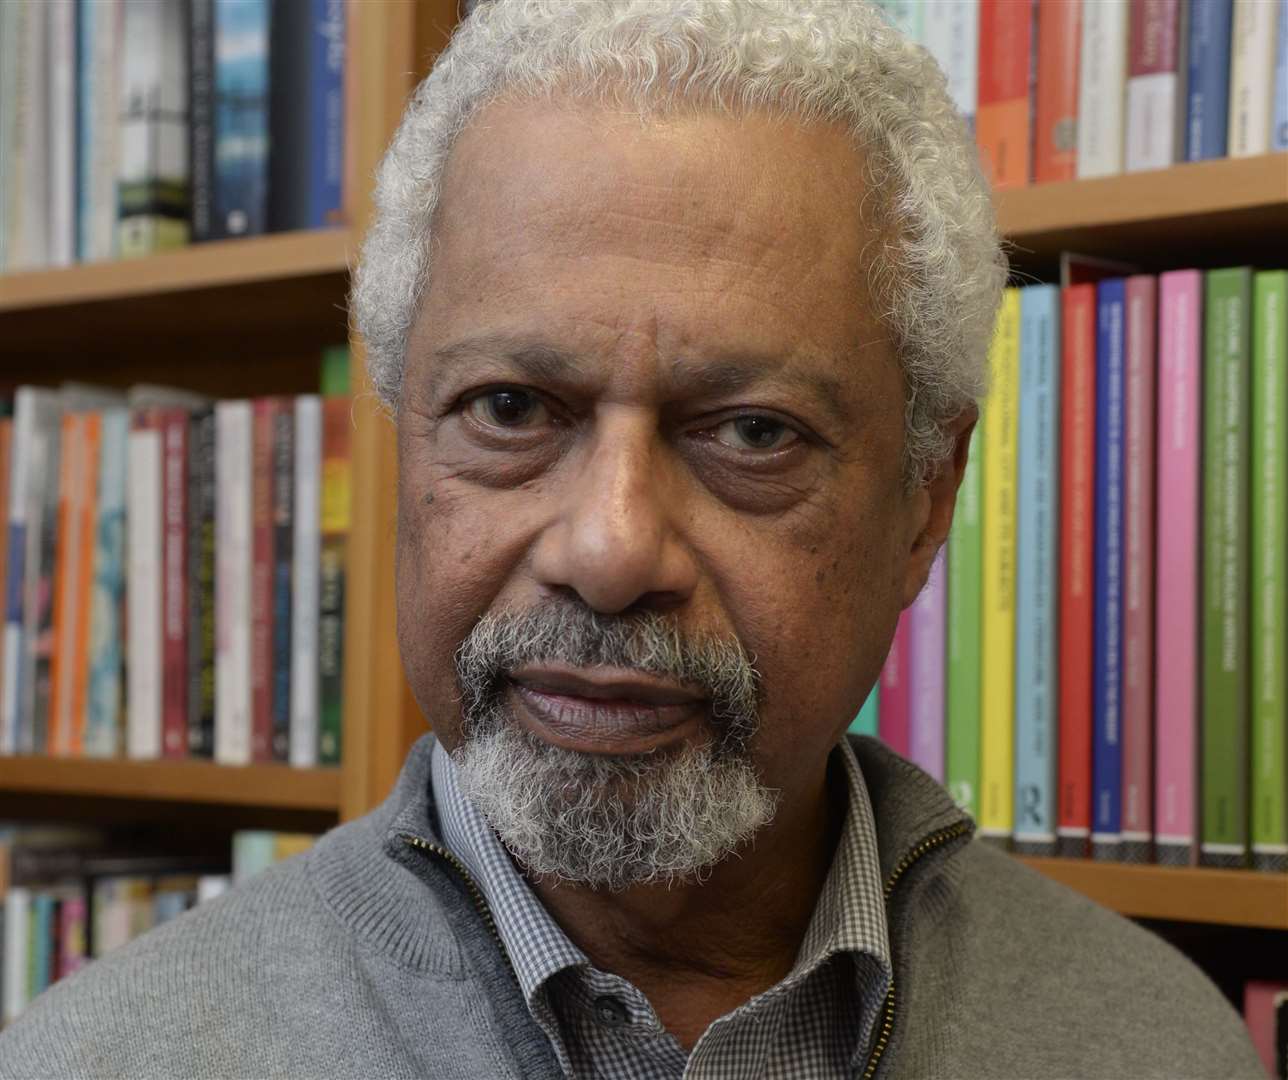 Abdulrazak Gurnah has been named winner of the 2021 Nobel Prize in Literature. Picture: Chris Davey